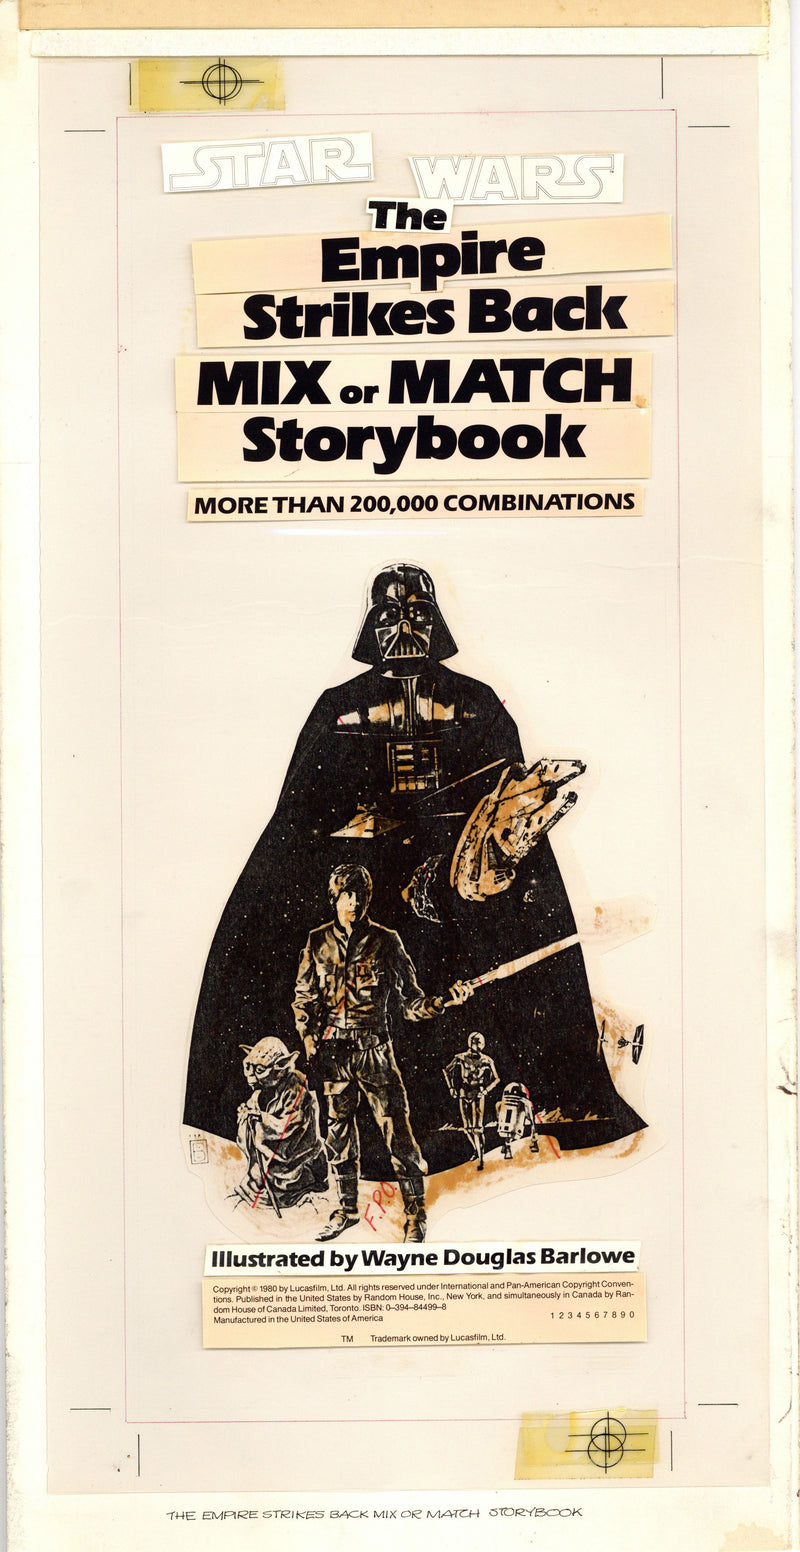 Star Wars: The Empire Strikes Back Mix and Match Storybook Cover Layout Concept